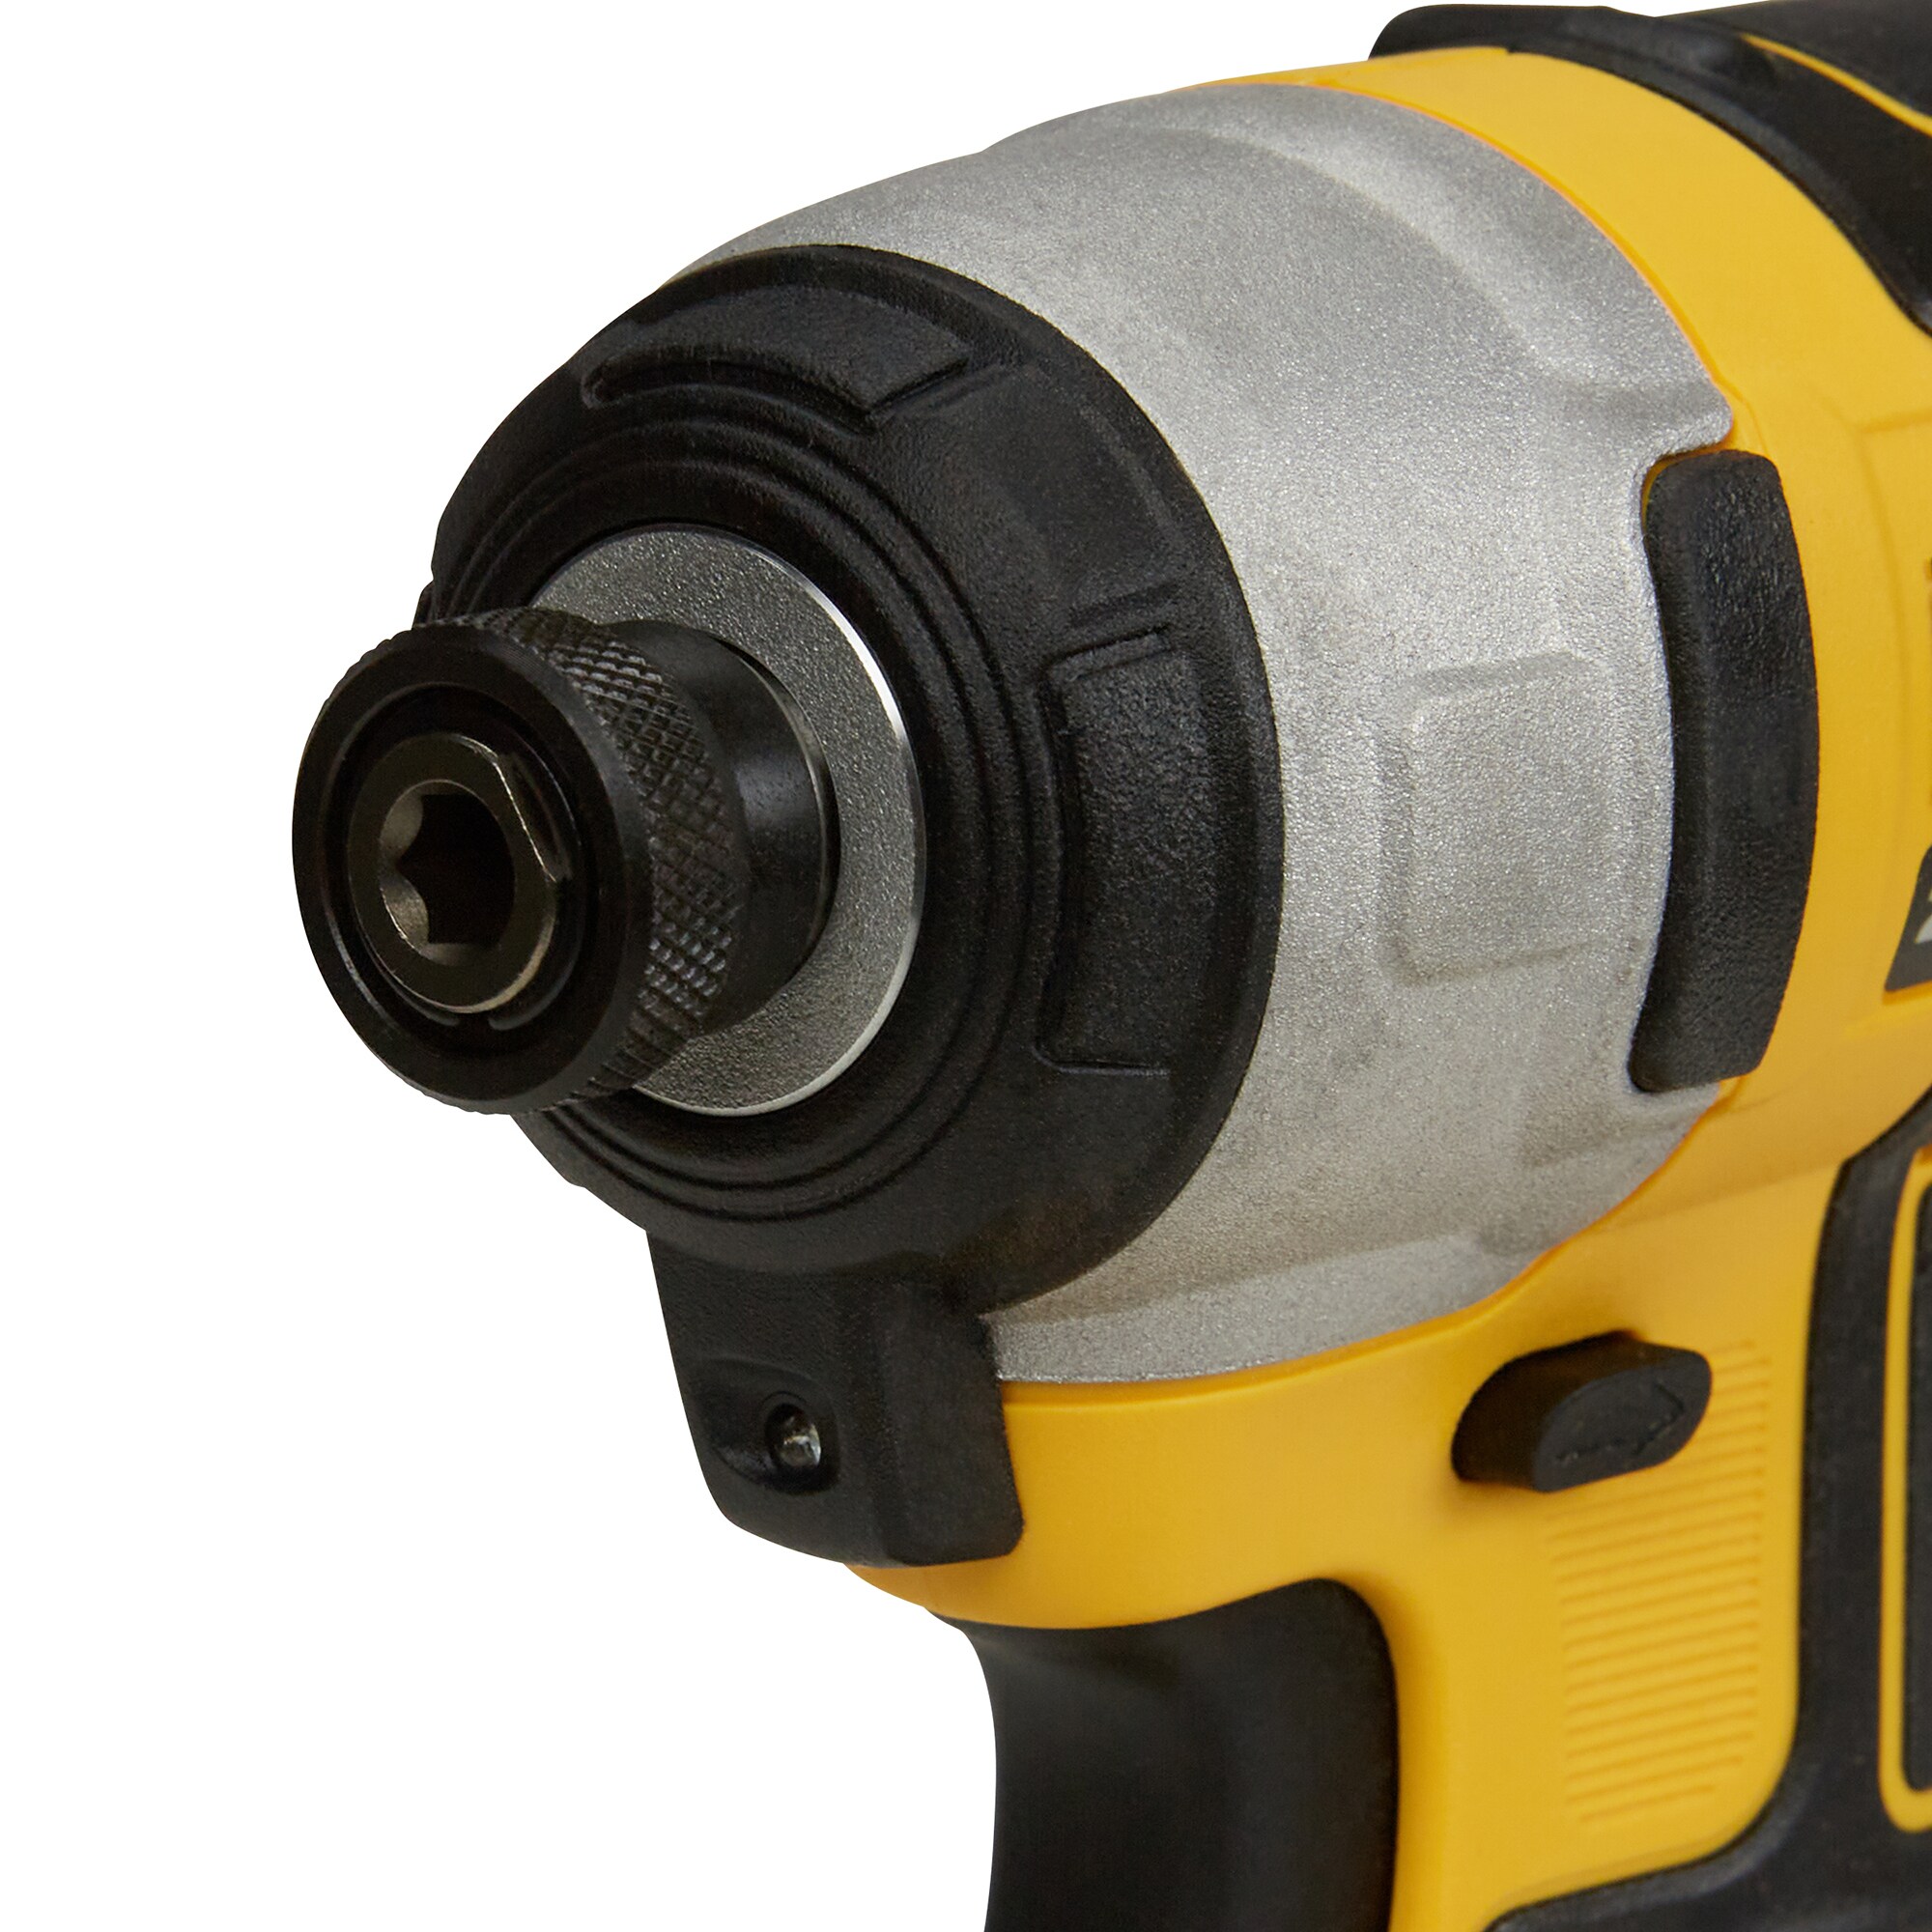 DEWALT 20-volt Max 1/4-in Variable Speed Brushless Cordless Impact Driver (2-Batteries Included)